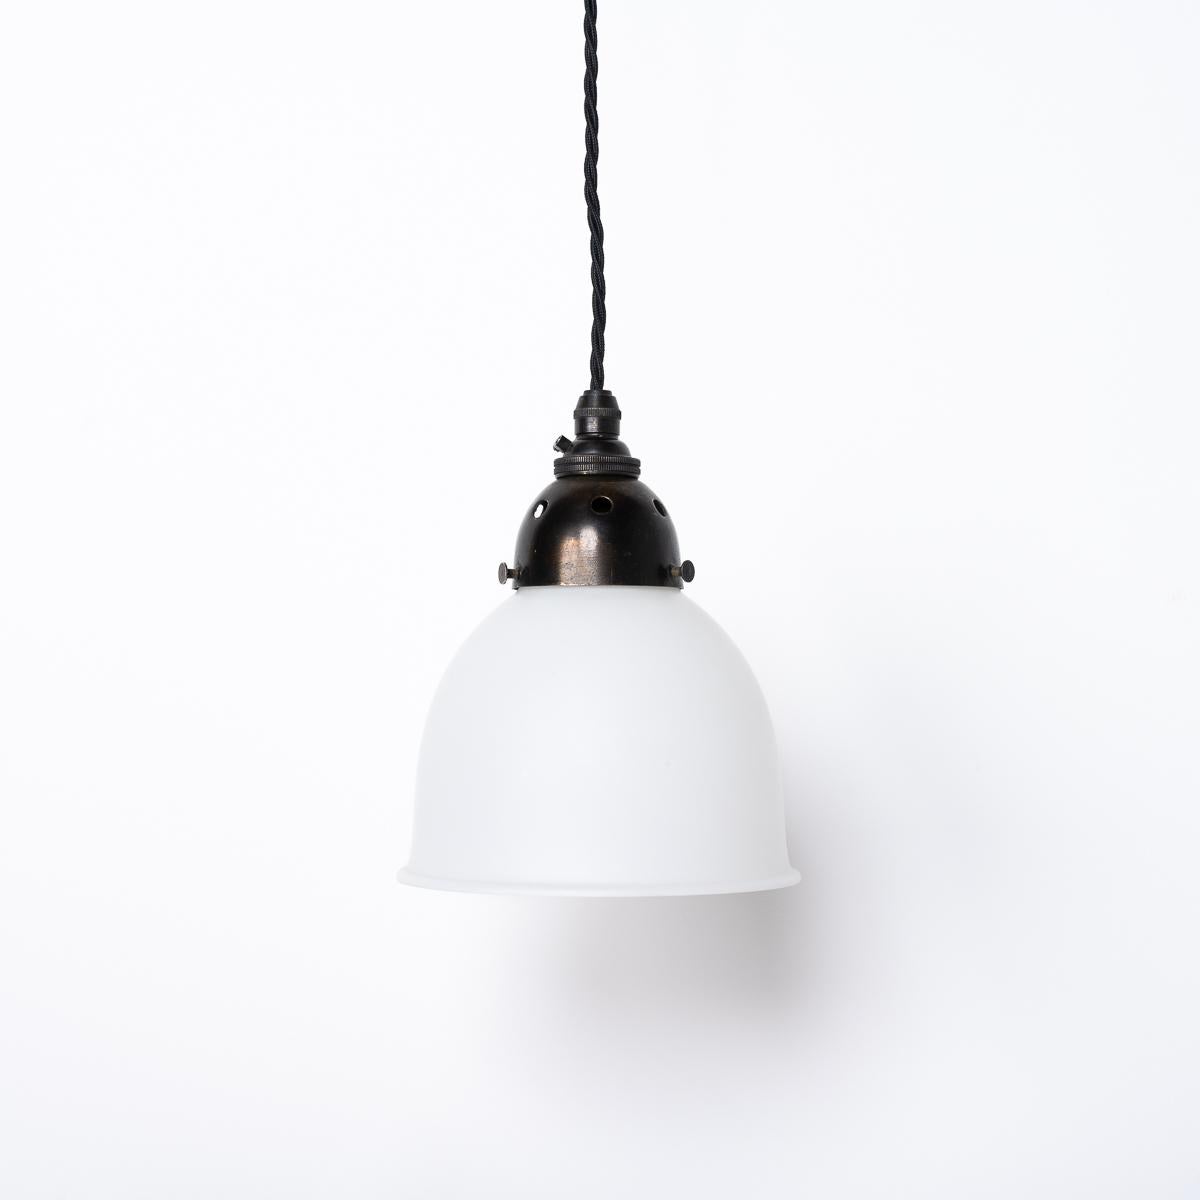 Small Opal GEC SUPASTONE Pendant Lights
SOLD AS A SET OF THREE

A beautiful set of small pendant lights

Matte opal white glass with aged brass fittings in an elegance shape that offer a stunning diffused glow when illuminated.

Manufactured in